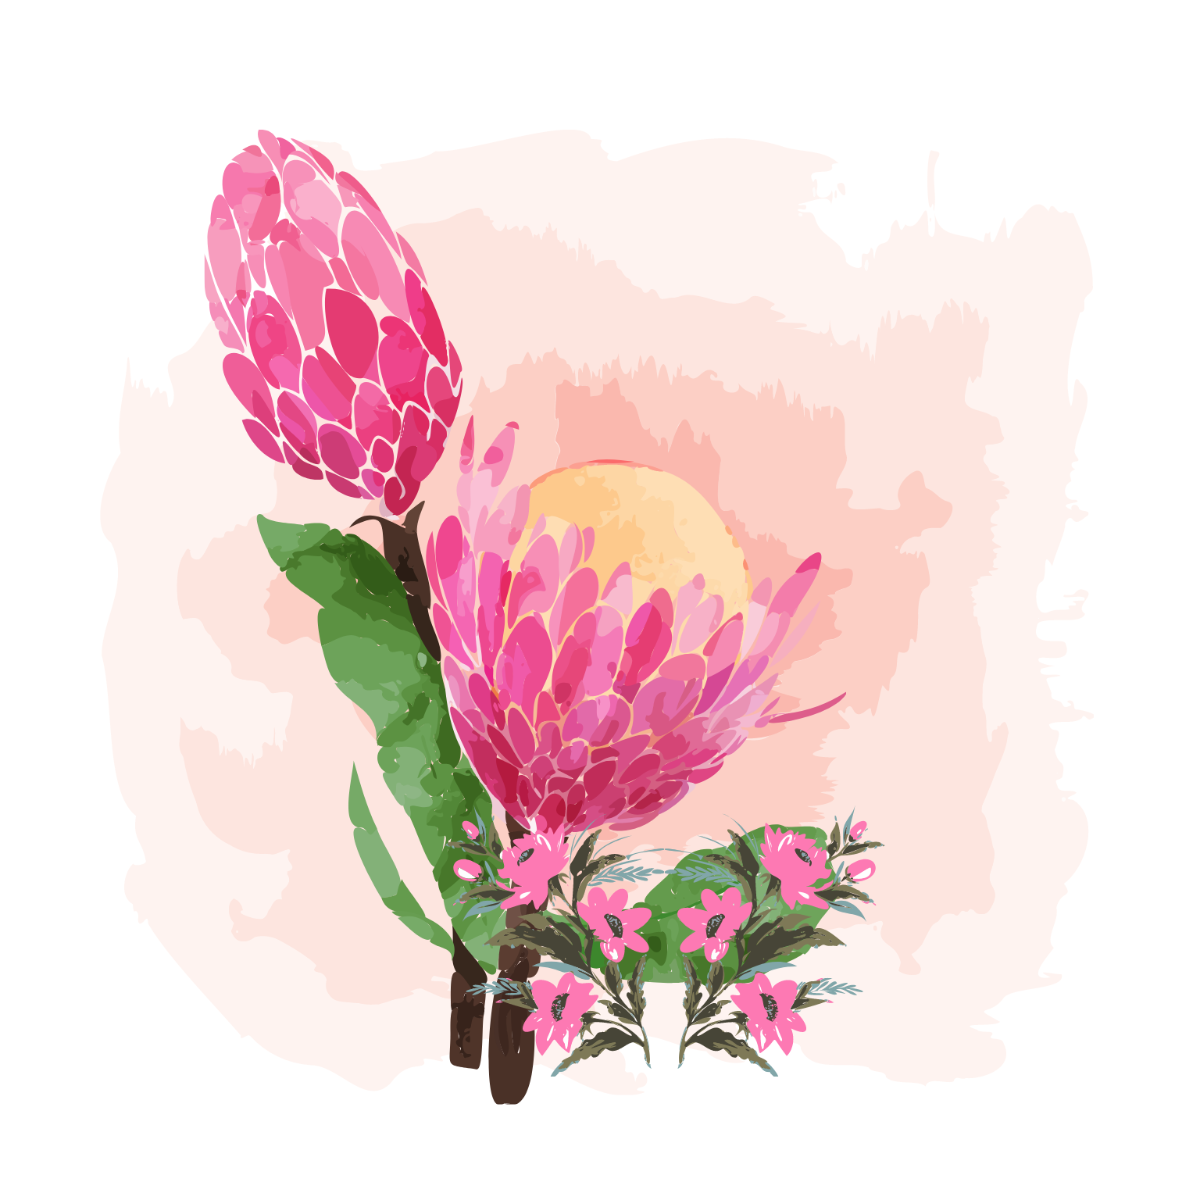 Flower Watercolor Illustrations Template